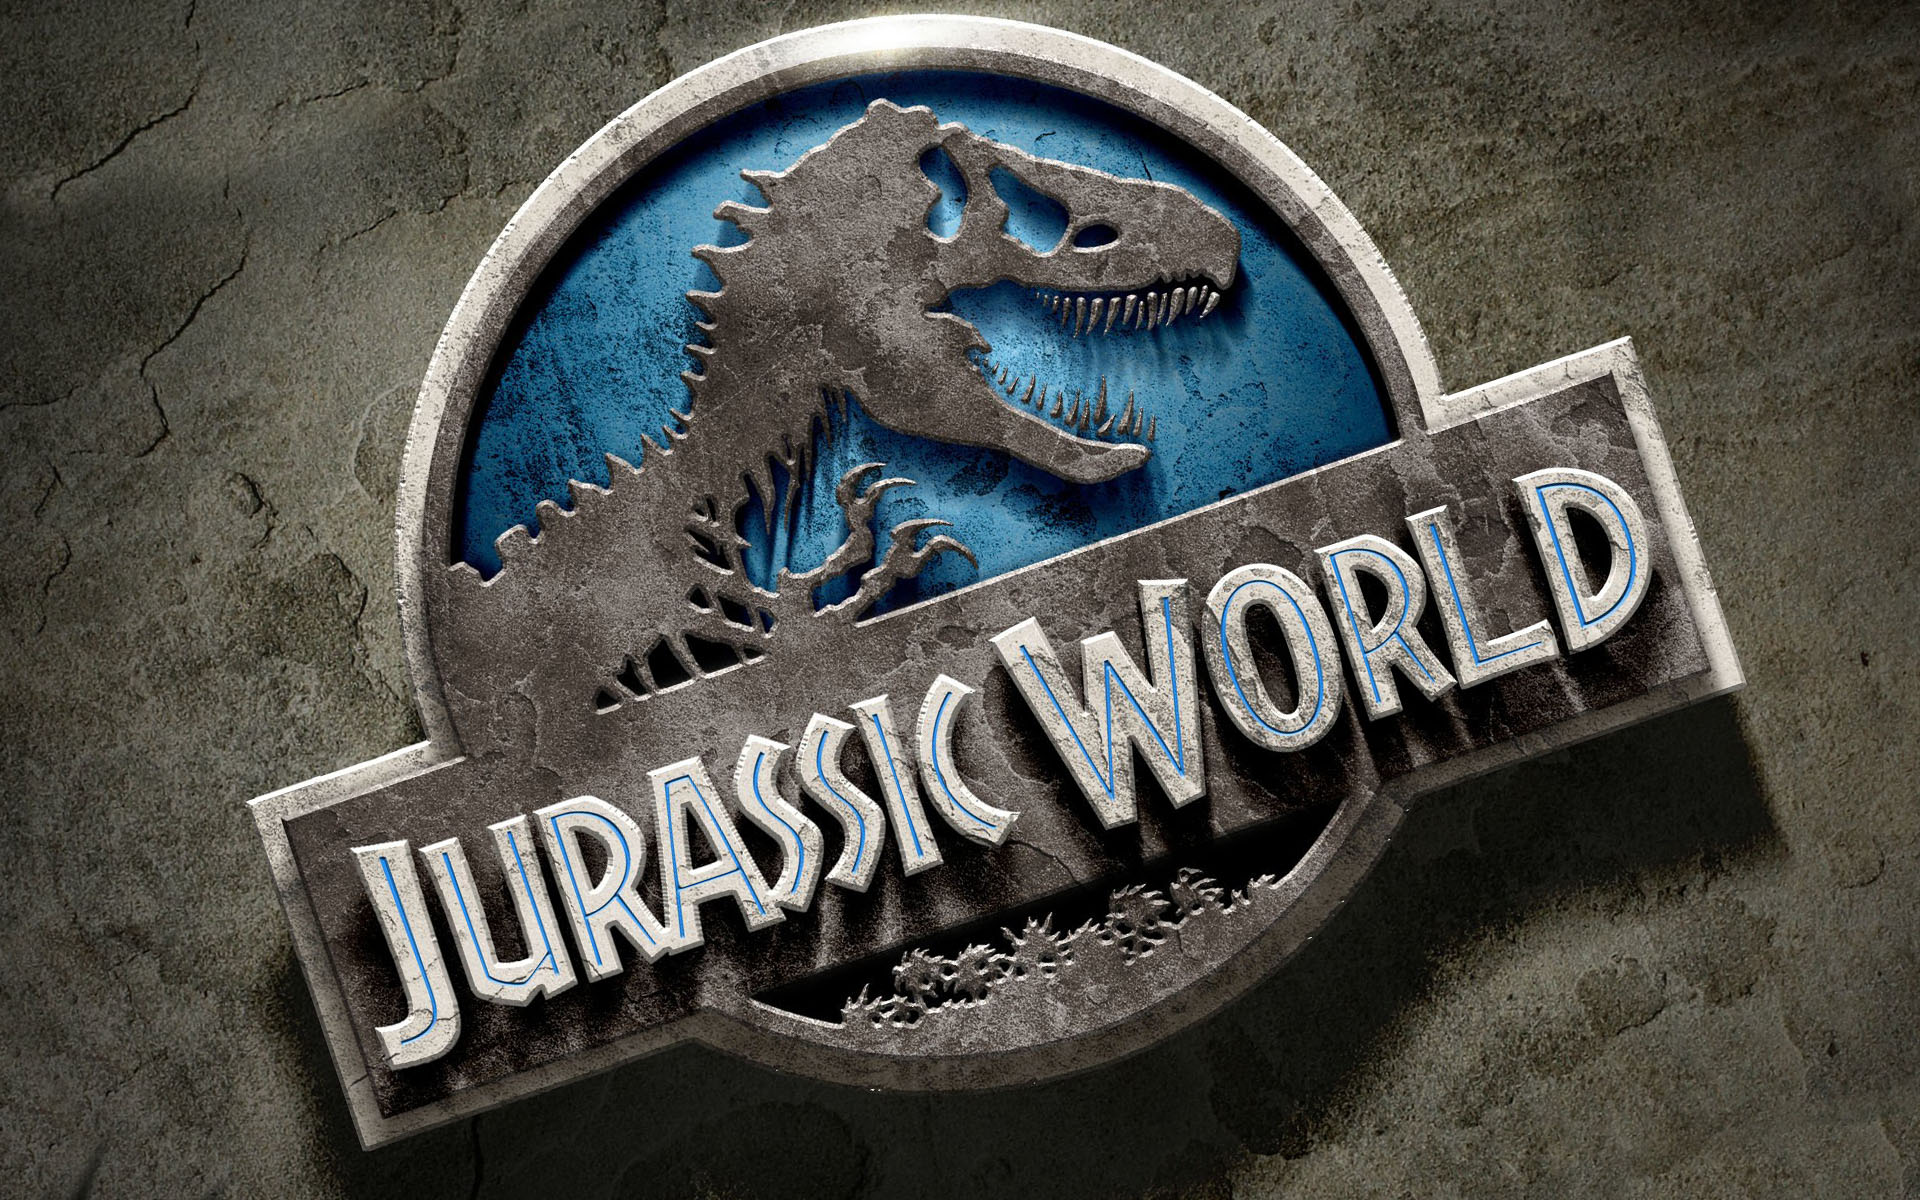 60 Jurassic World HD Wallpapers and Backgrounds